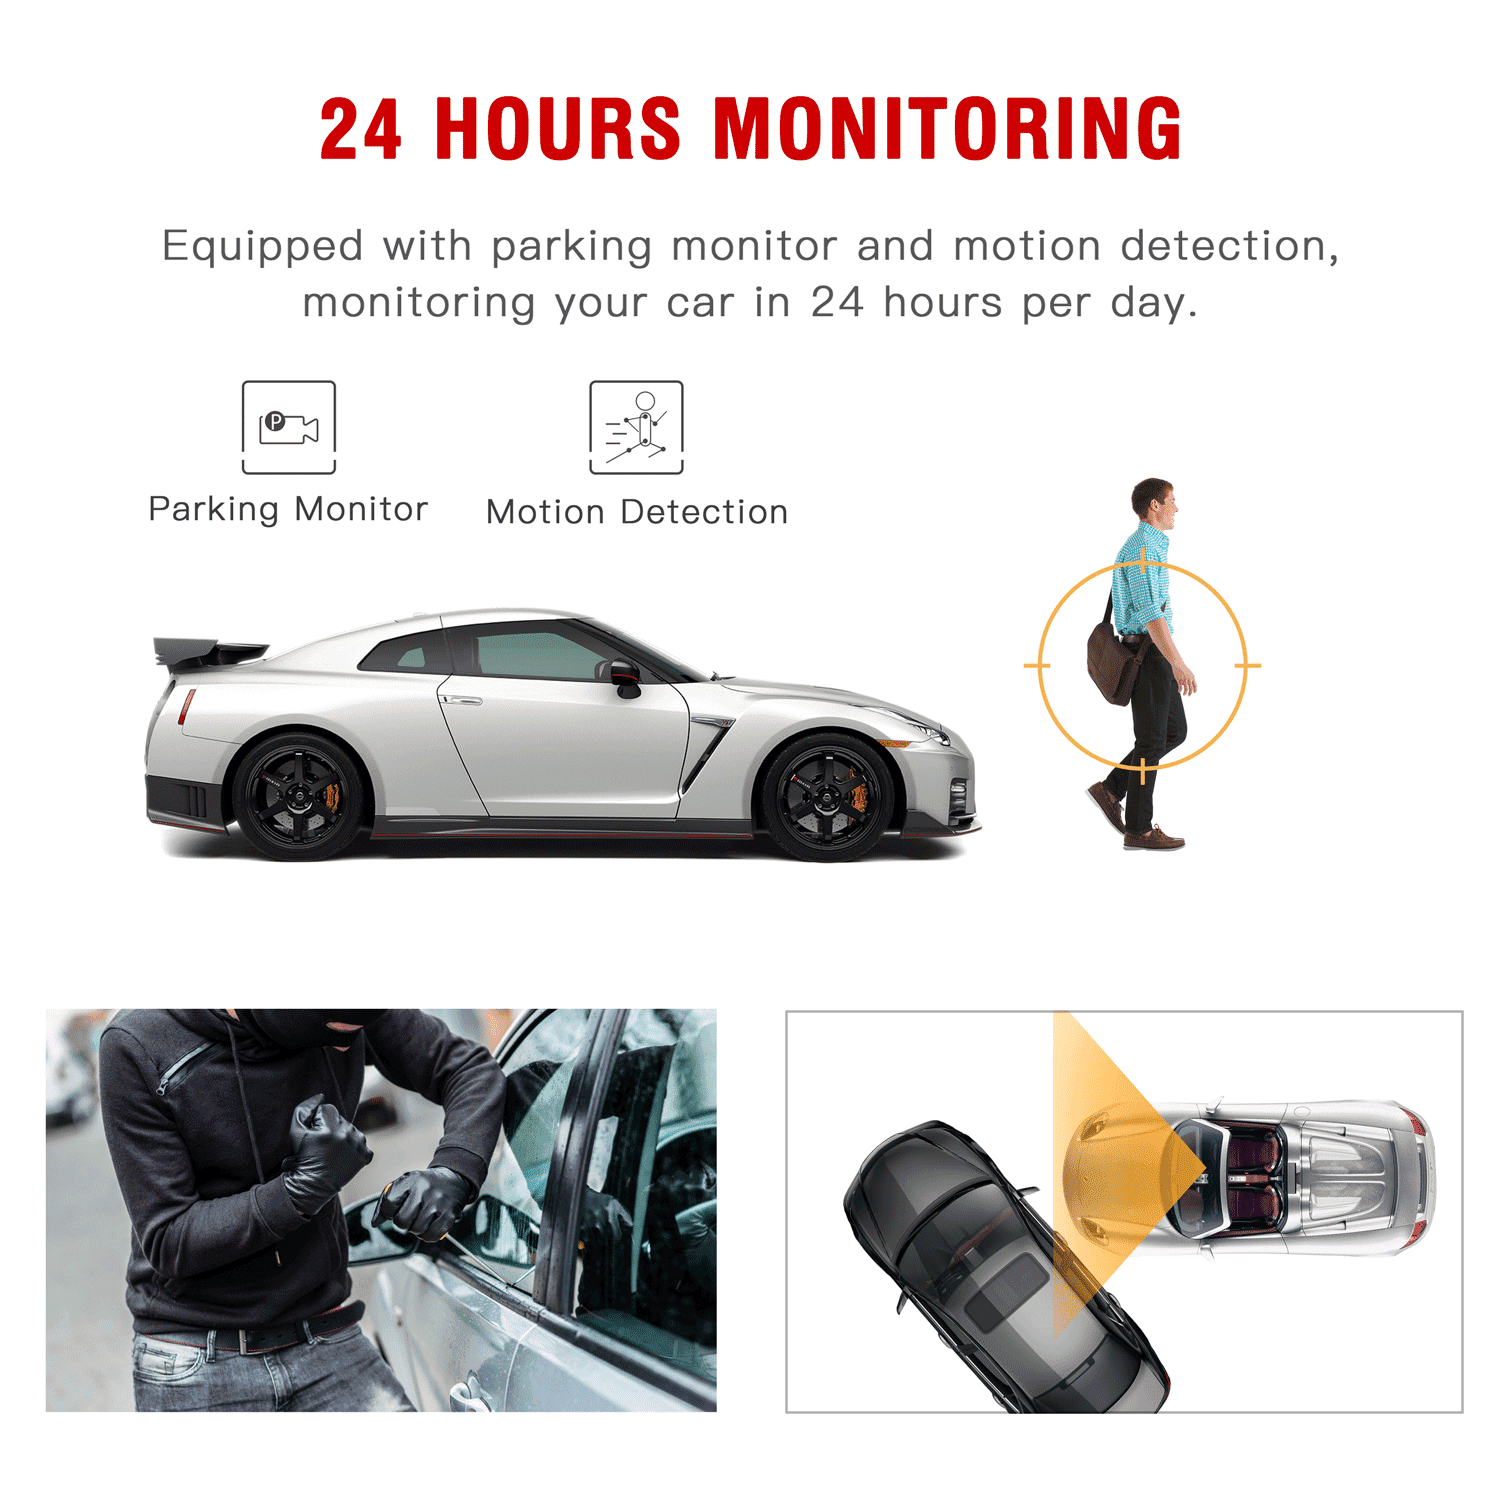 G-sensor Parking Monitor Dual Lens 1080P Front Camera and IP67 Waterproof Rear Camera Motion Detection Suitable for Night Vision Dash Cam ILIHOME 7 Touch Screen Mirror Auto Camera 